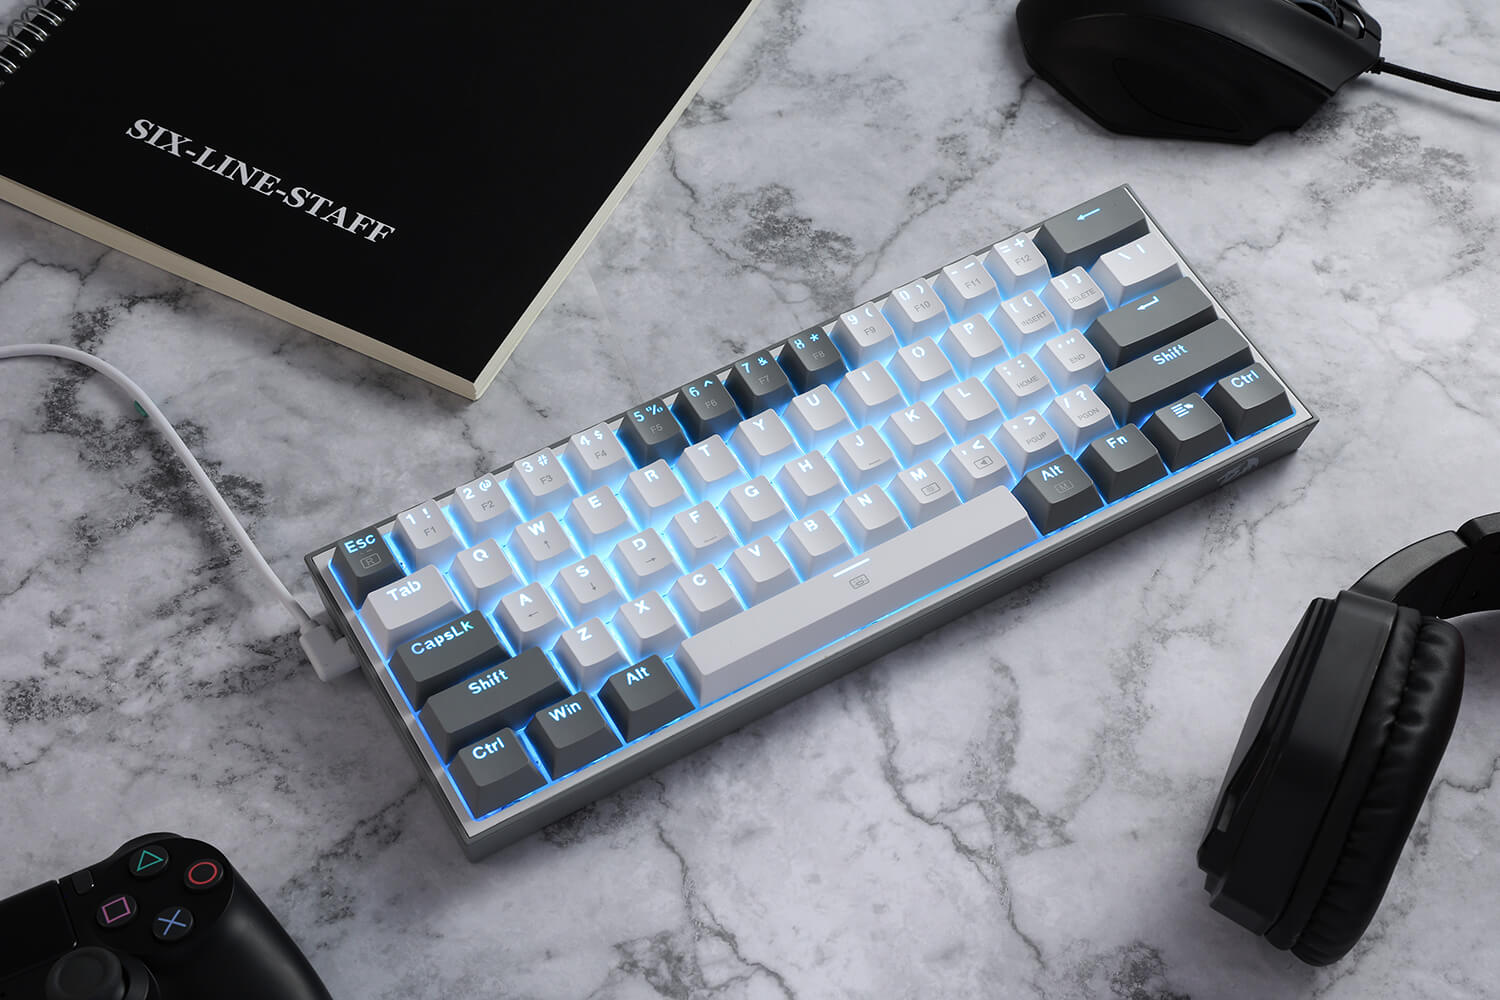 61 Keys Compact Mechanical Keyboard w/White and Grey Color Keycaps